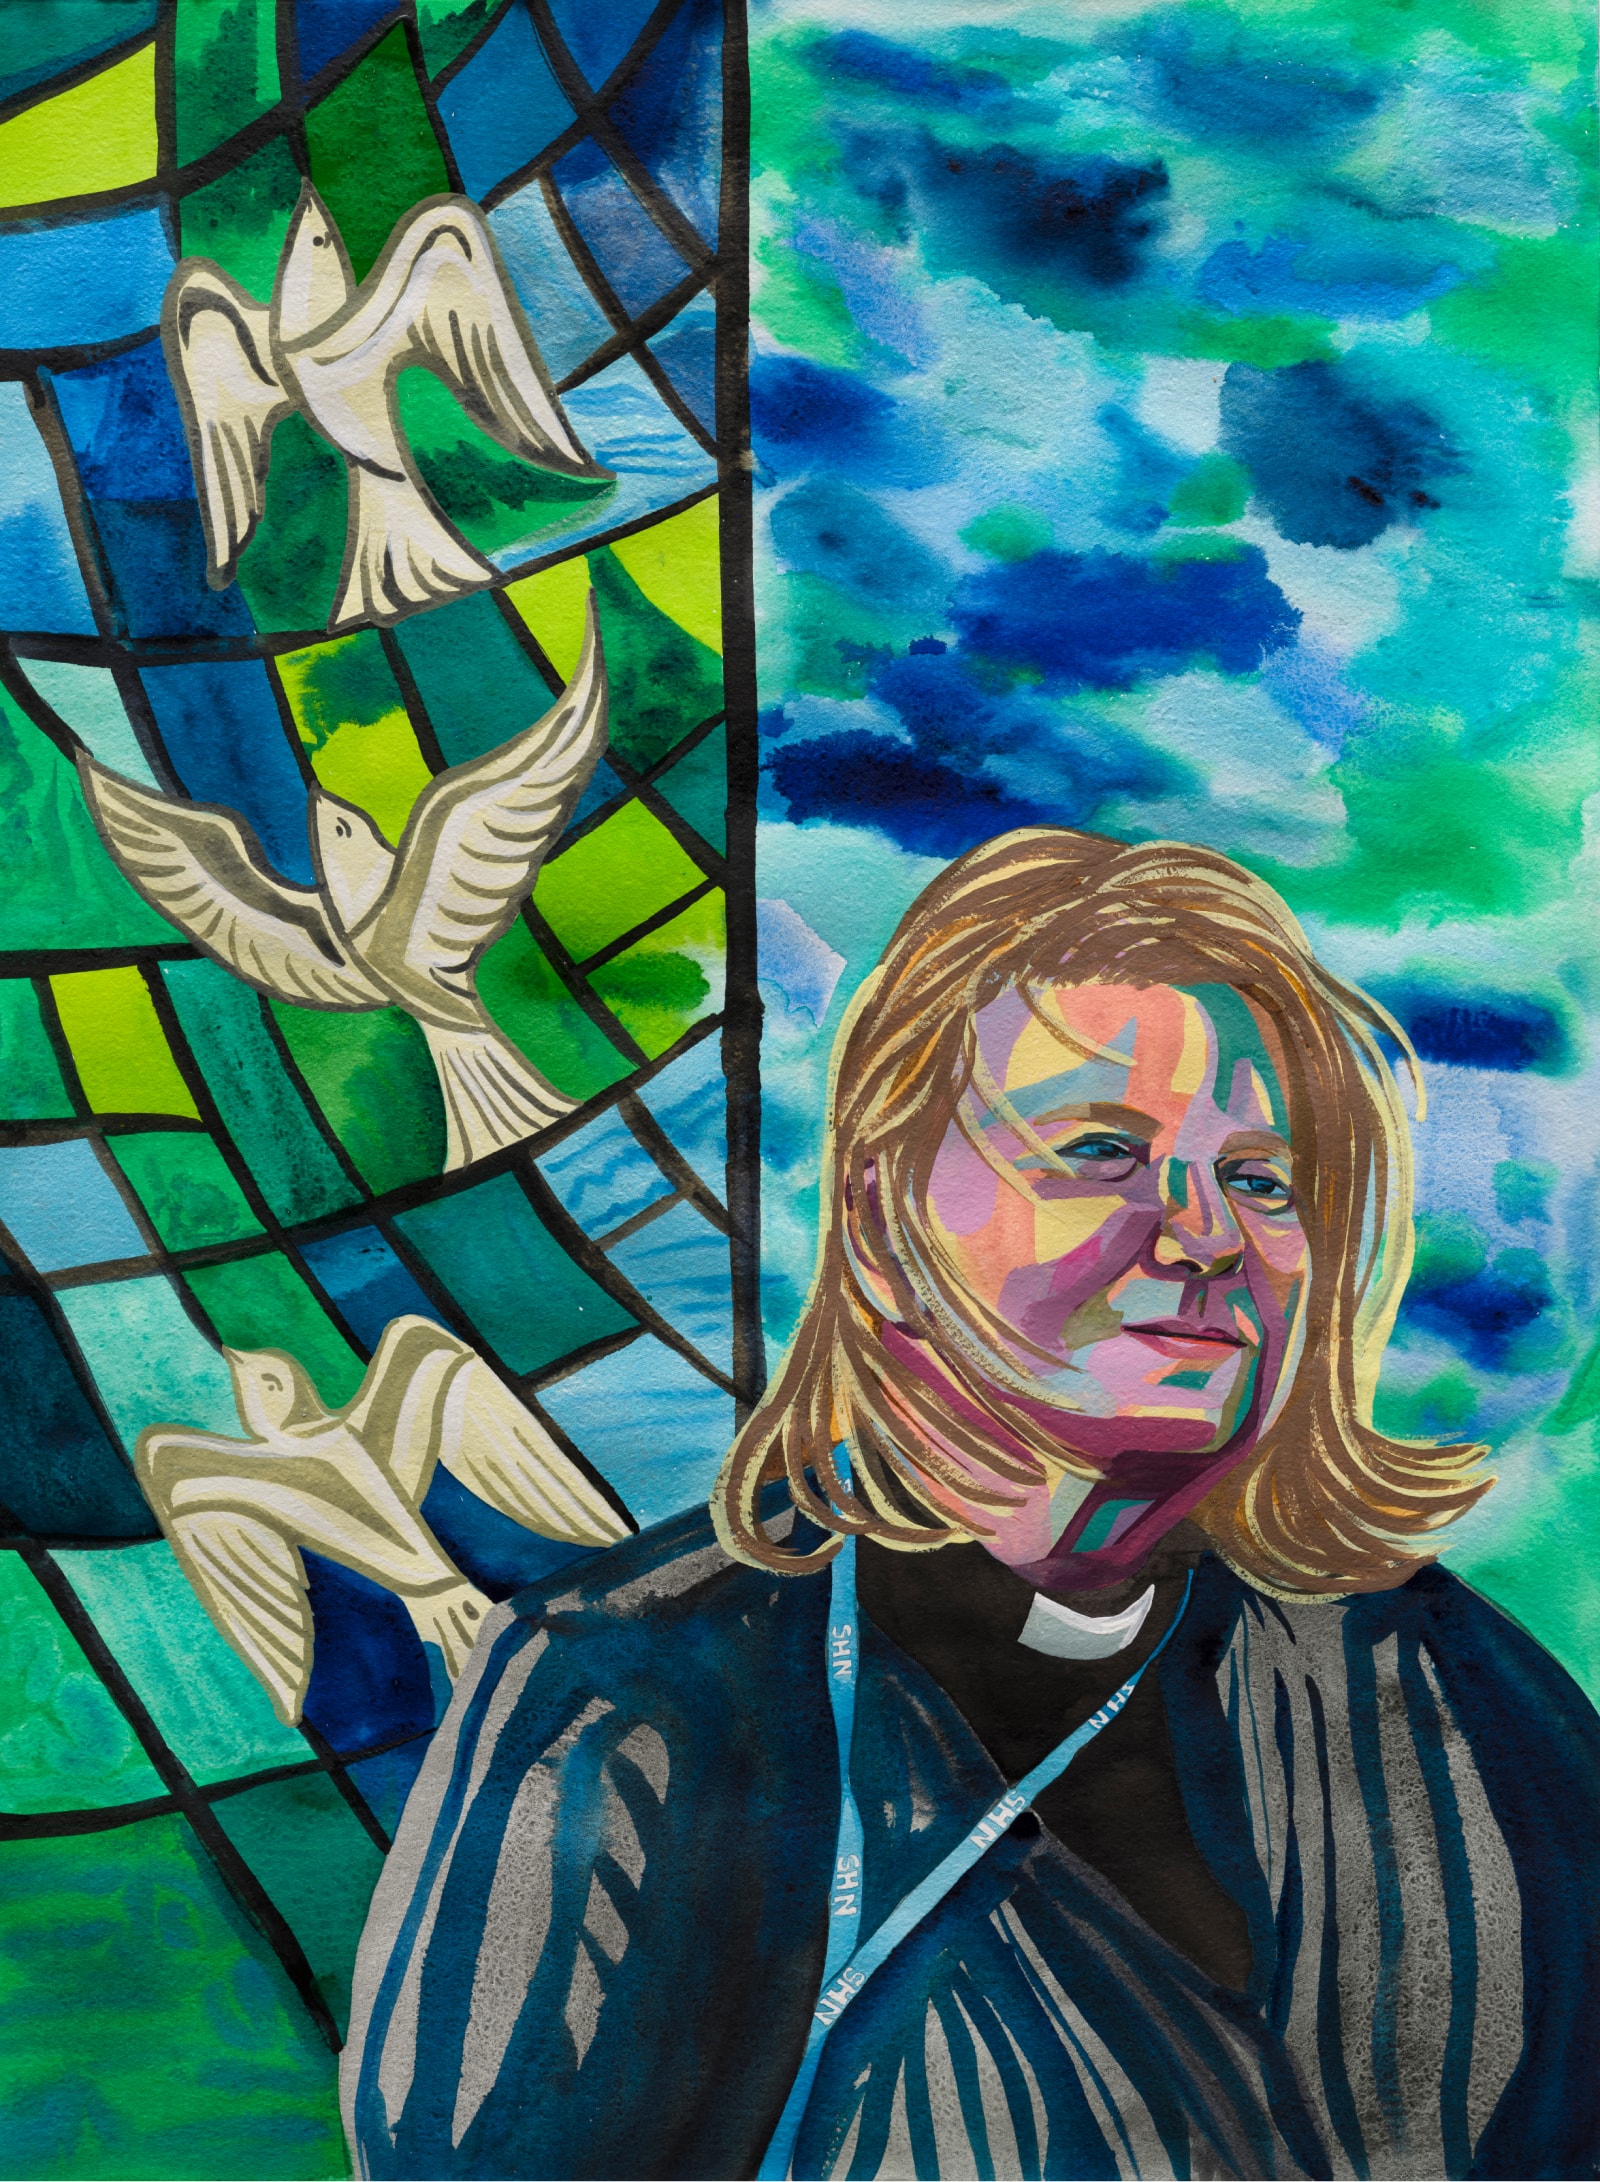 Artwork featuring a woman in clergy robes stand in front of a green and blue glass window with doves